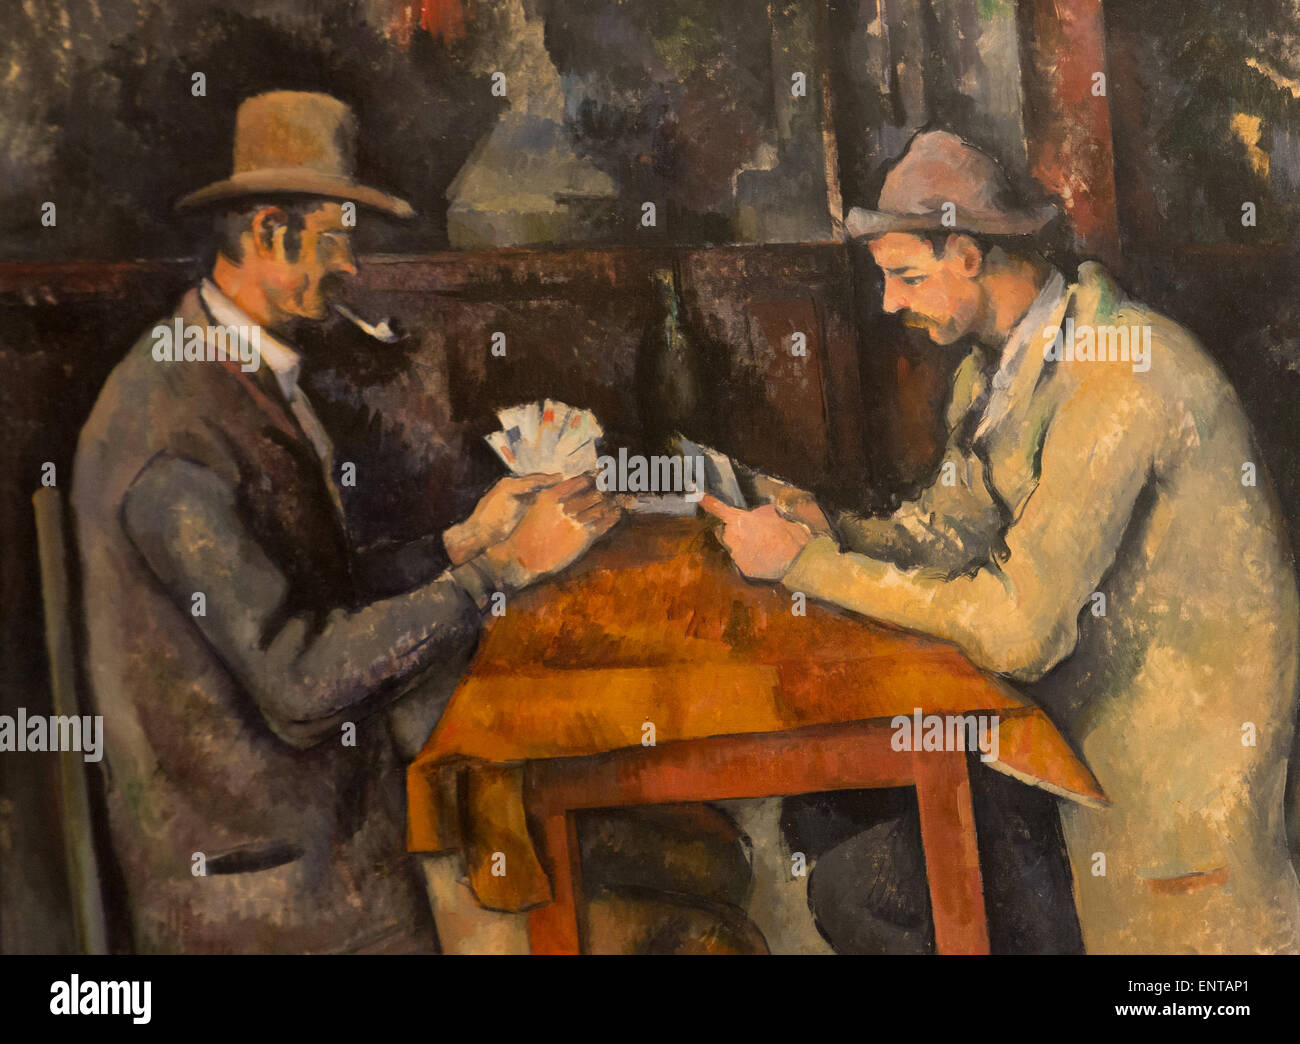 ActiveMuseum 0006316.jpg / The card players Cezanne became interested in depicting labourers playing cards. During the 1890s he completed five painting of this subject. 22/01/2014  -   / 19th century Collection / Active Museum Stock Photo